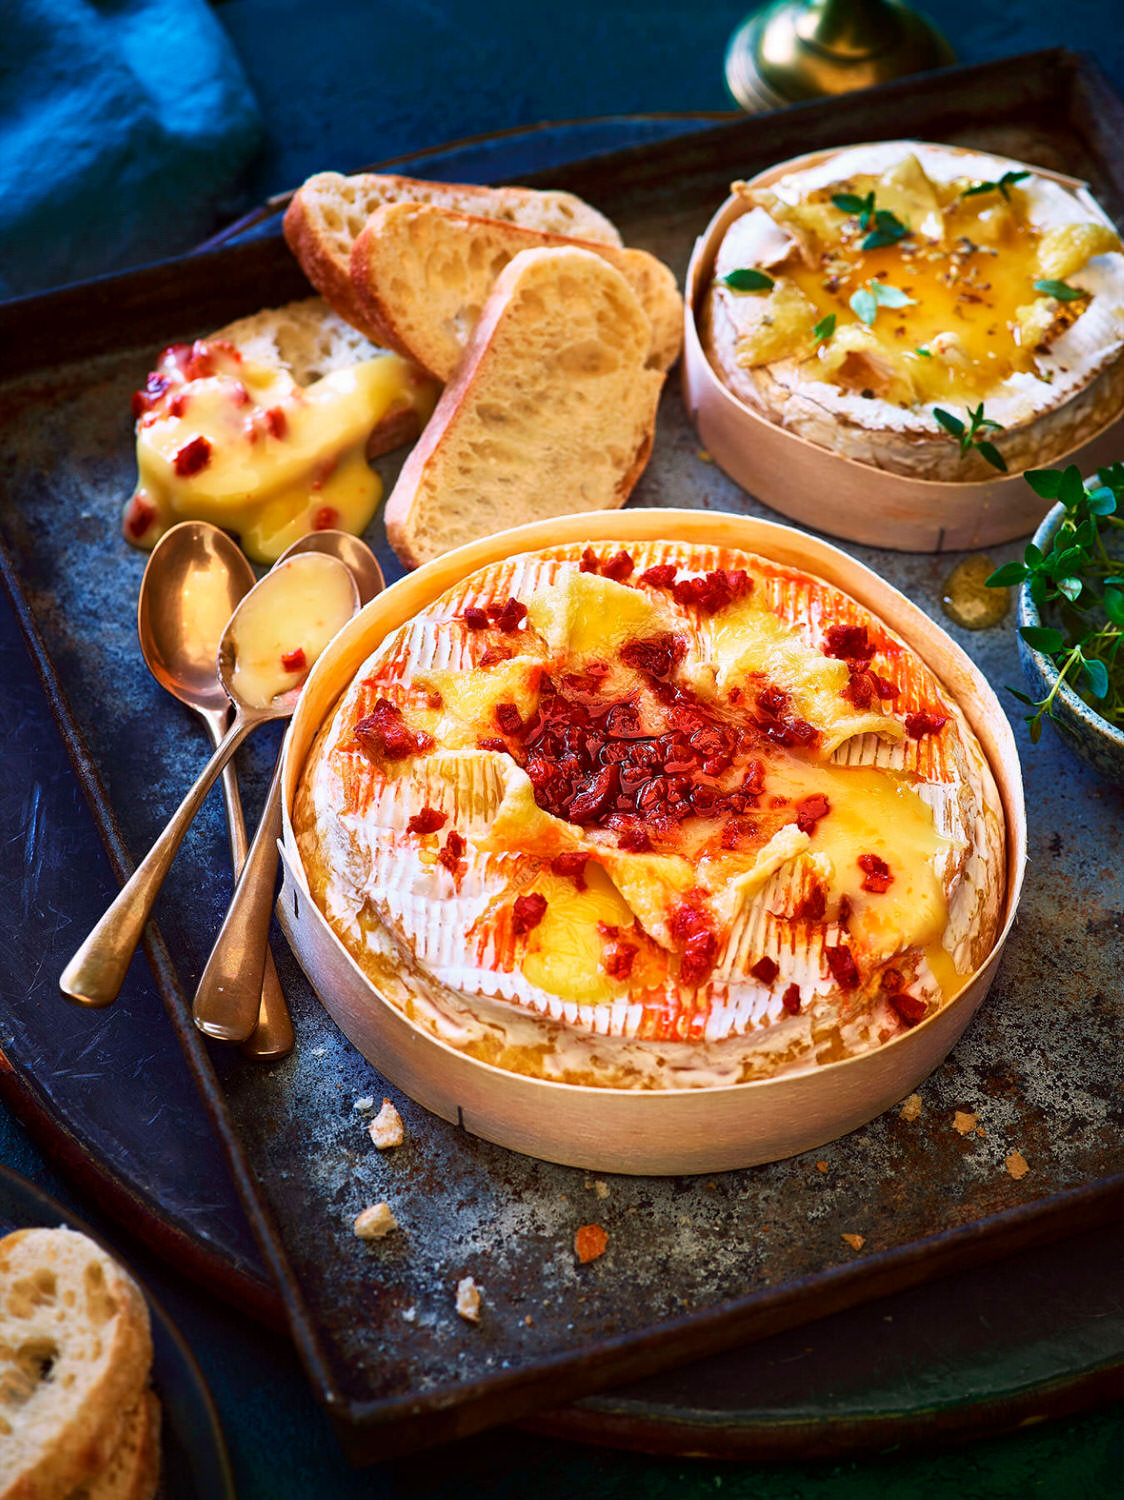 Melted baked Camembert with a bacon and sweet tomato topping  served with crusty bread to share and dip